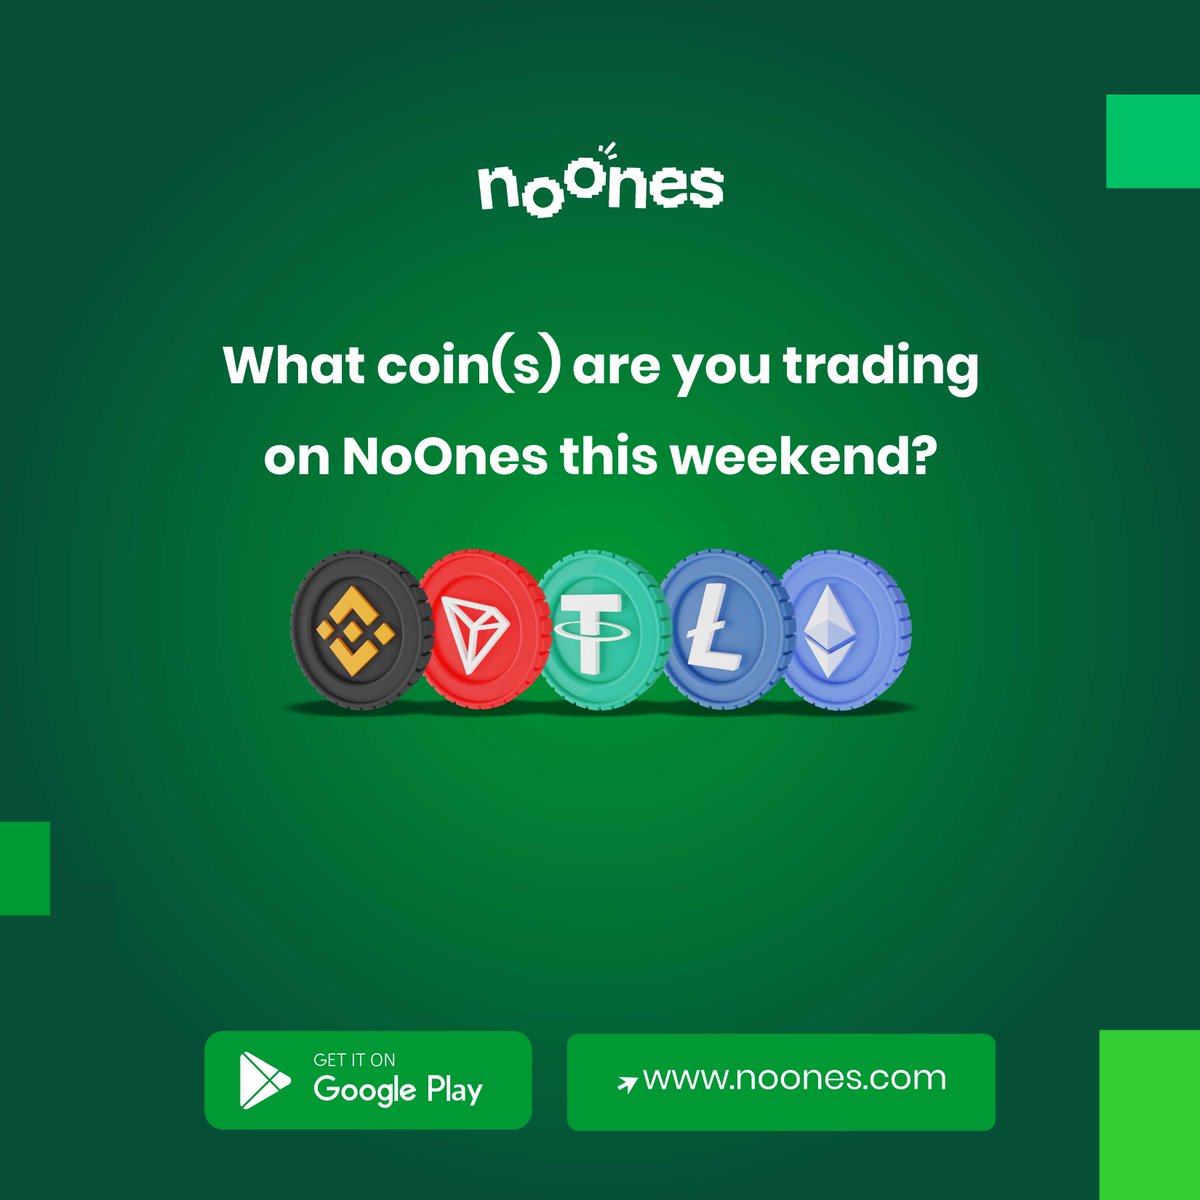 If you're not trading on #NoOnes this weekend, you're missing out! 💰 So drop whatever you're doing and come make some cash! 📈

Noones.com|#BTC #P2P #Bitcoin #MakeMoney